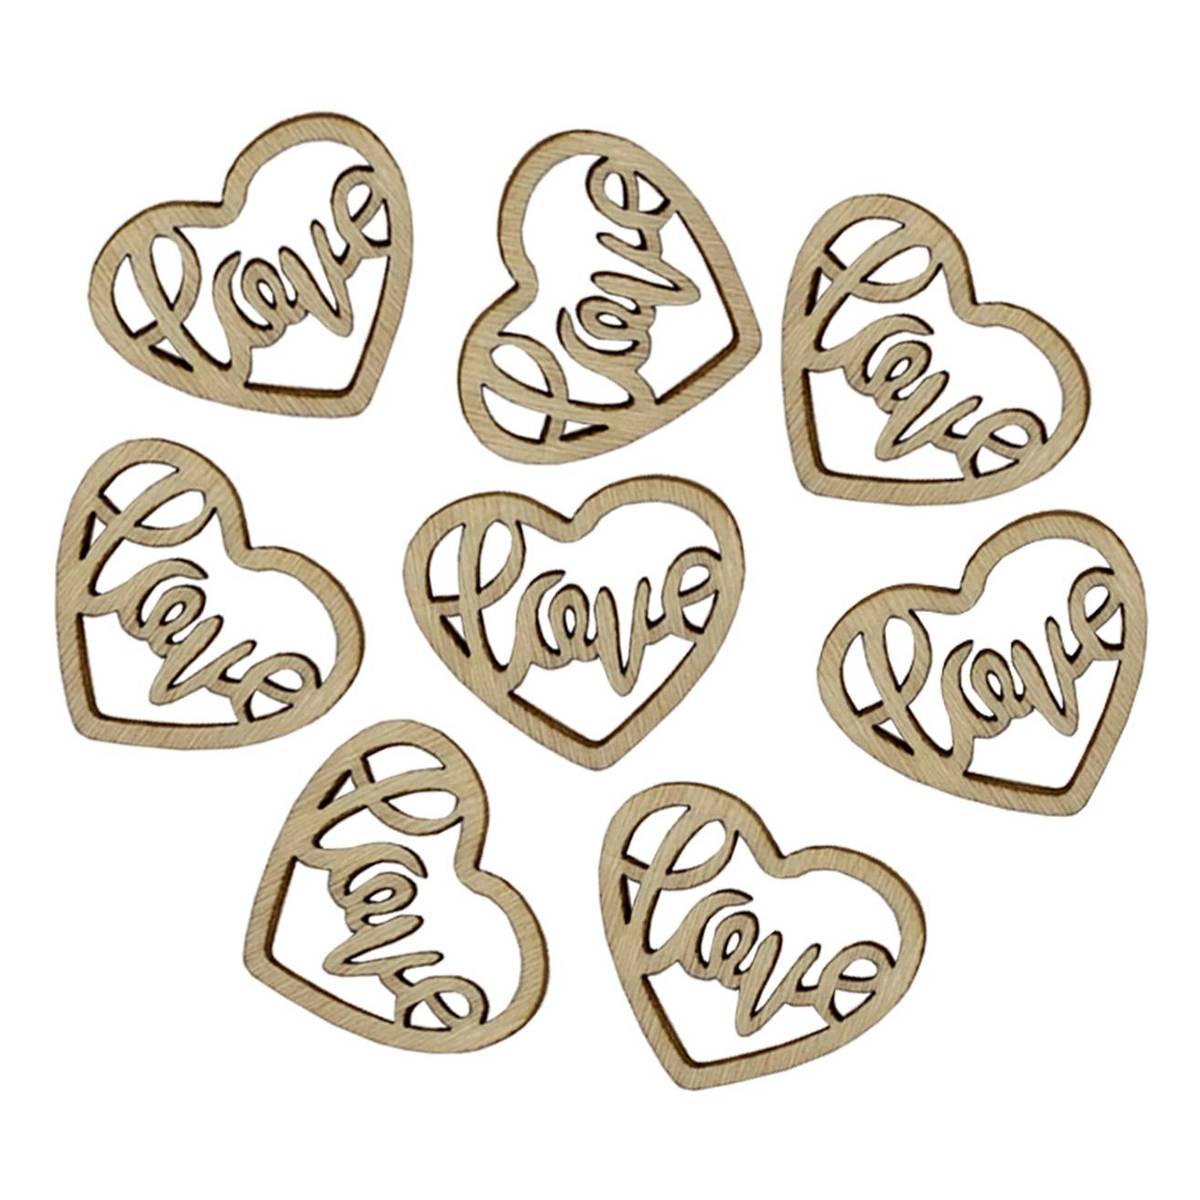 WOOD EMBELLISHMENT CRAFT TABLE CONFETTI GIFT TOPPER PP 25MM 100 500 HEART WE DO 